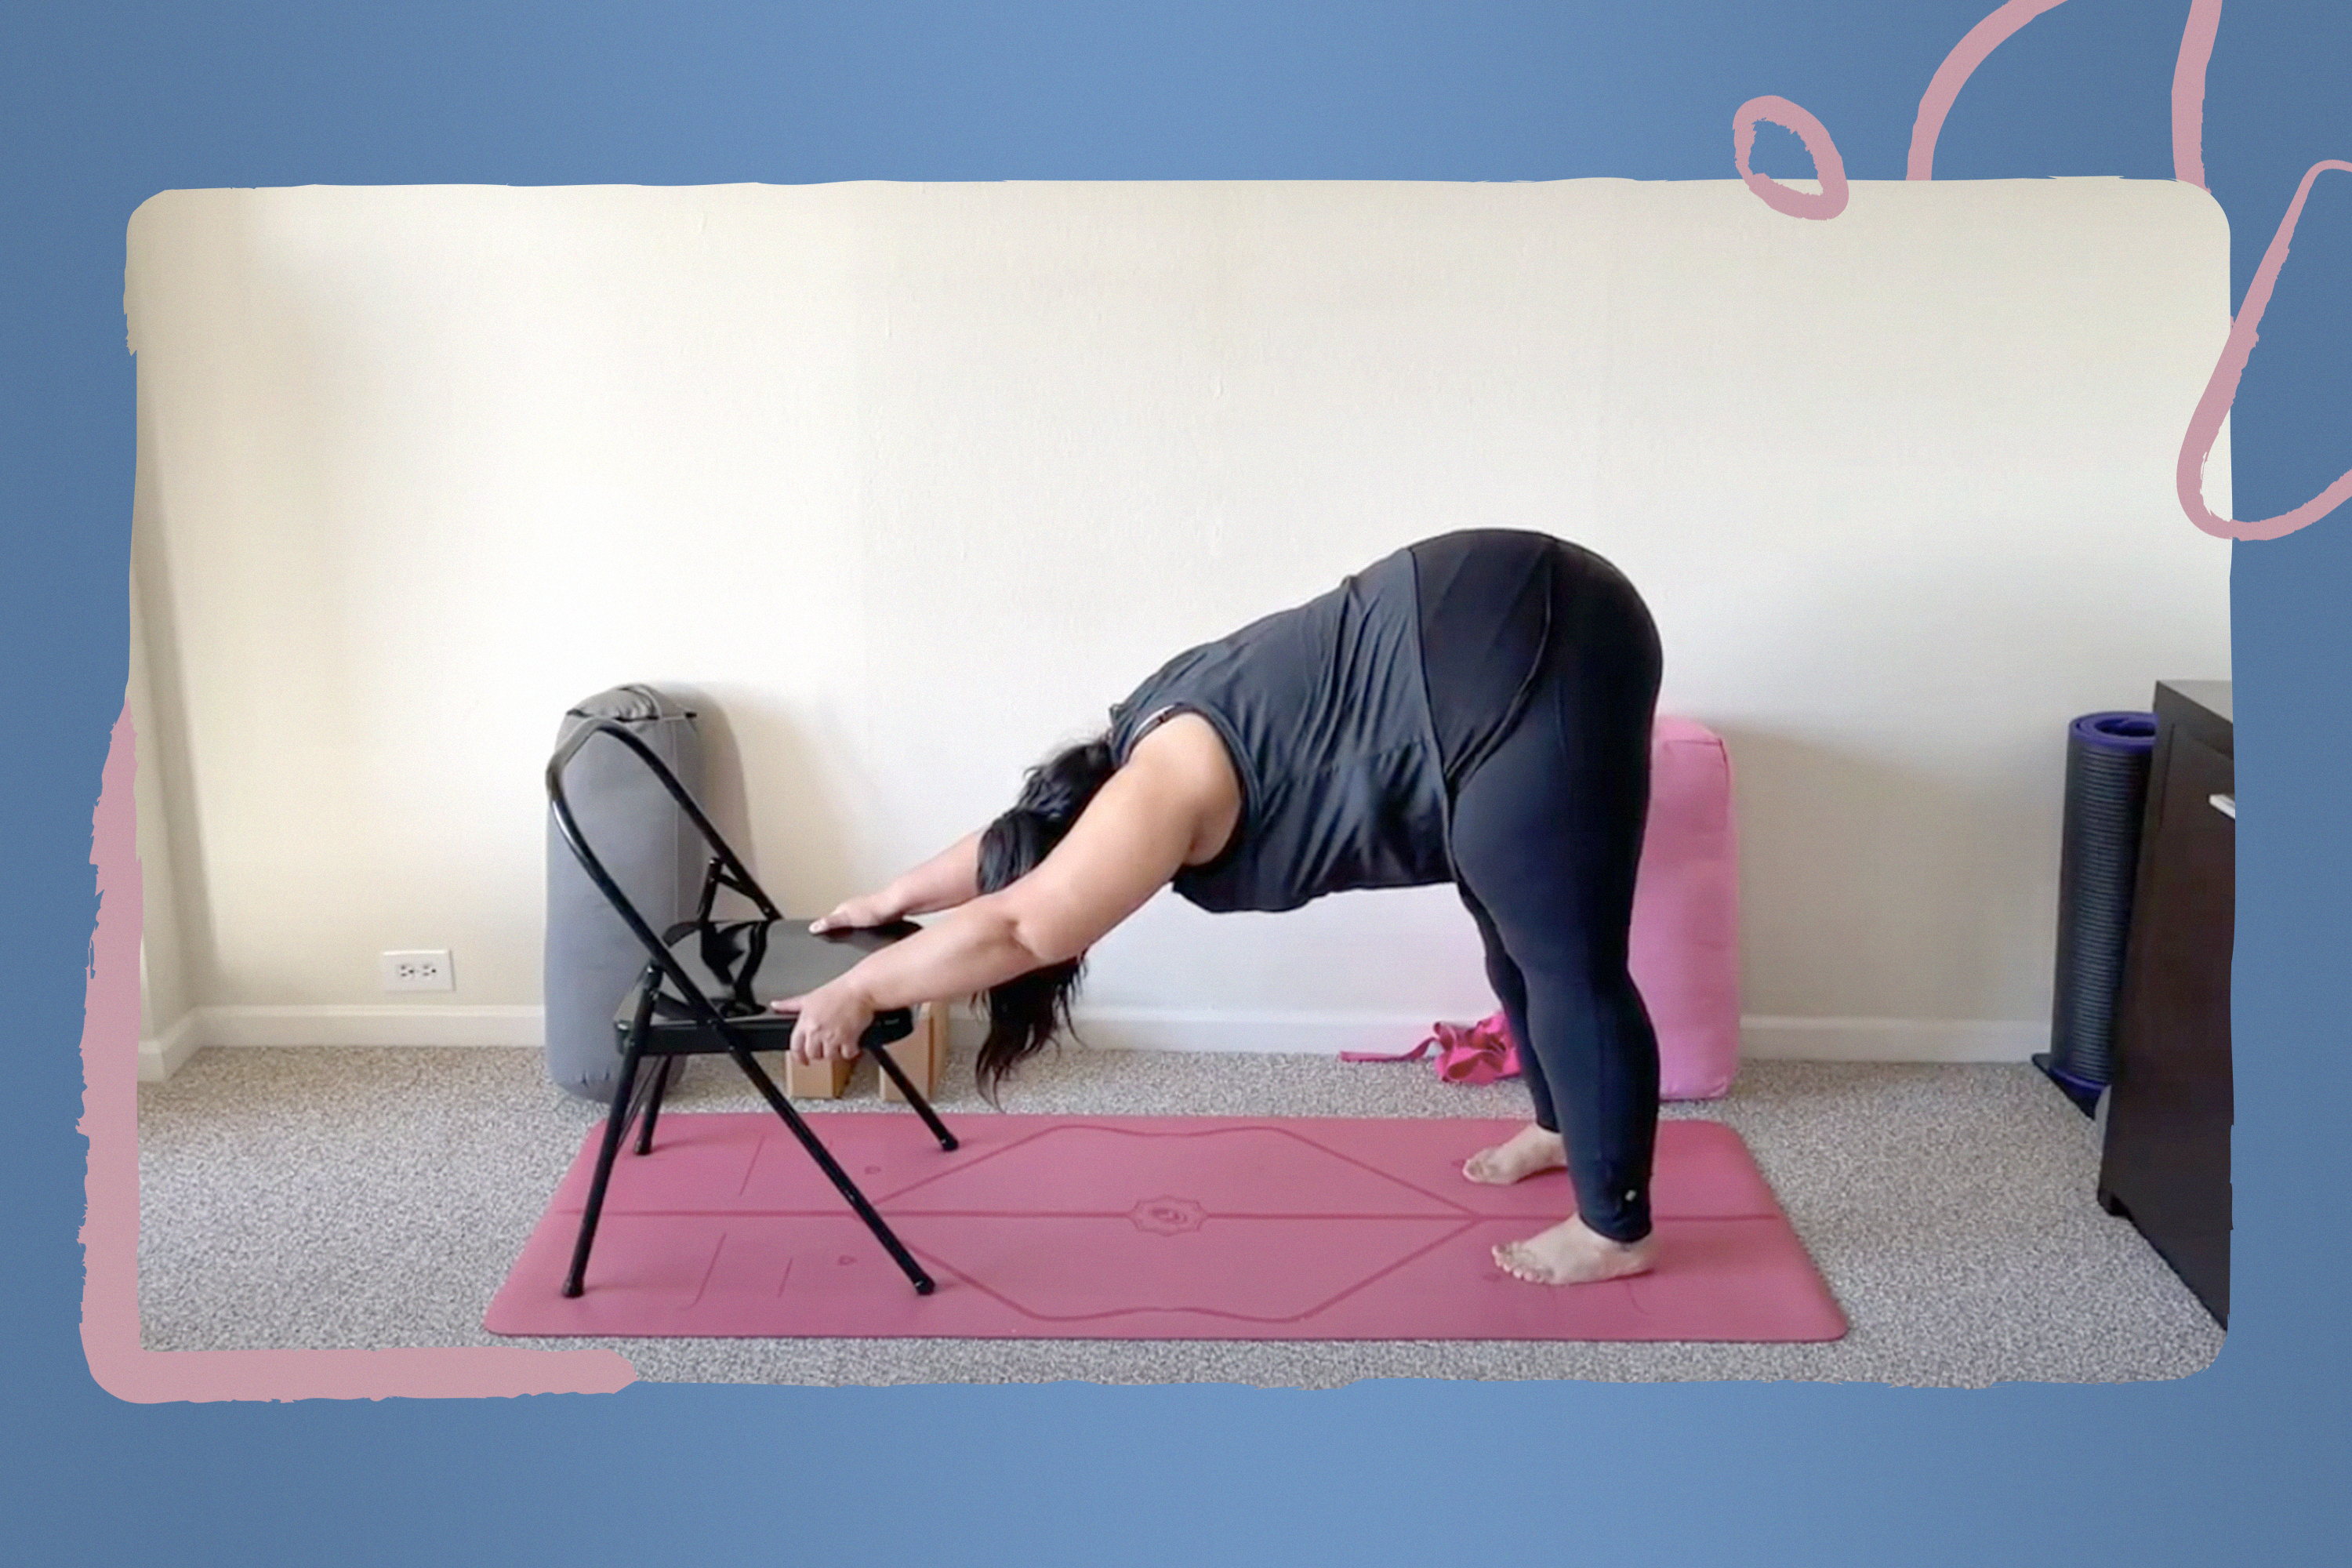 Wall Yoga by Colette - YouTube